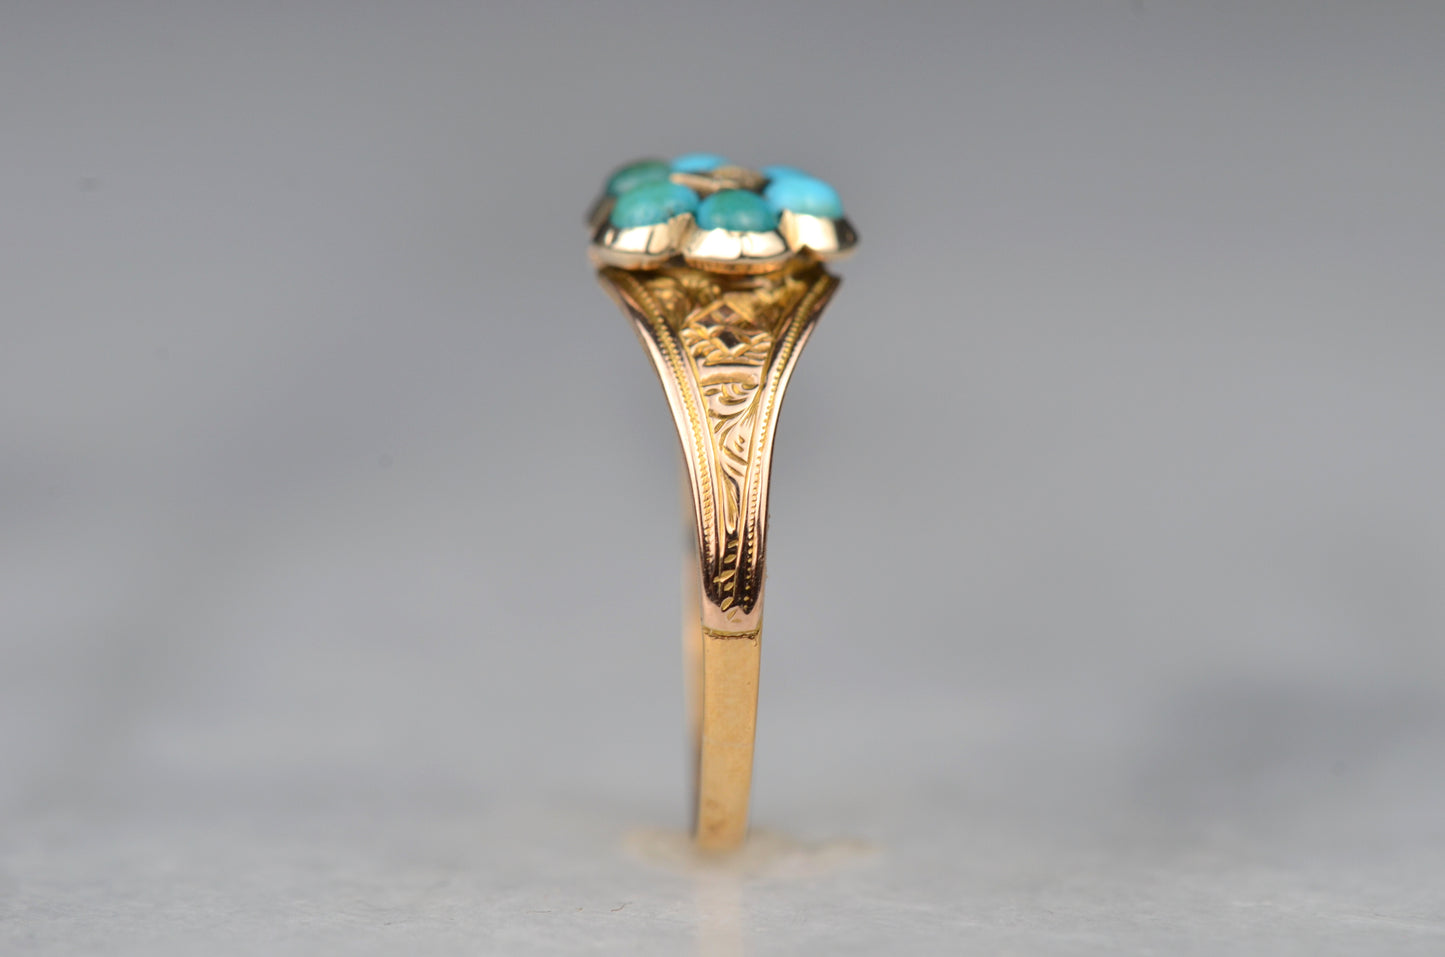 Darling Antique Turquoise Flower Ring